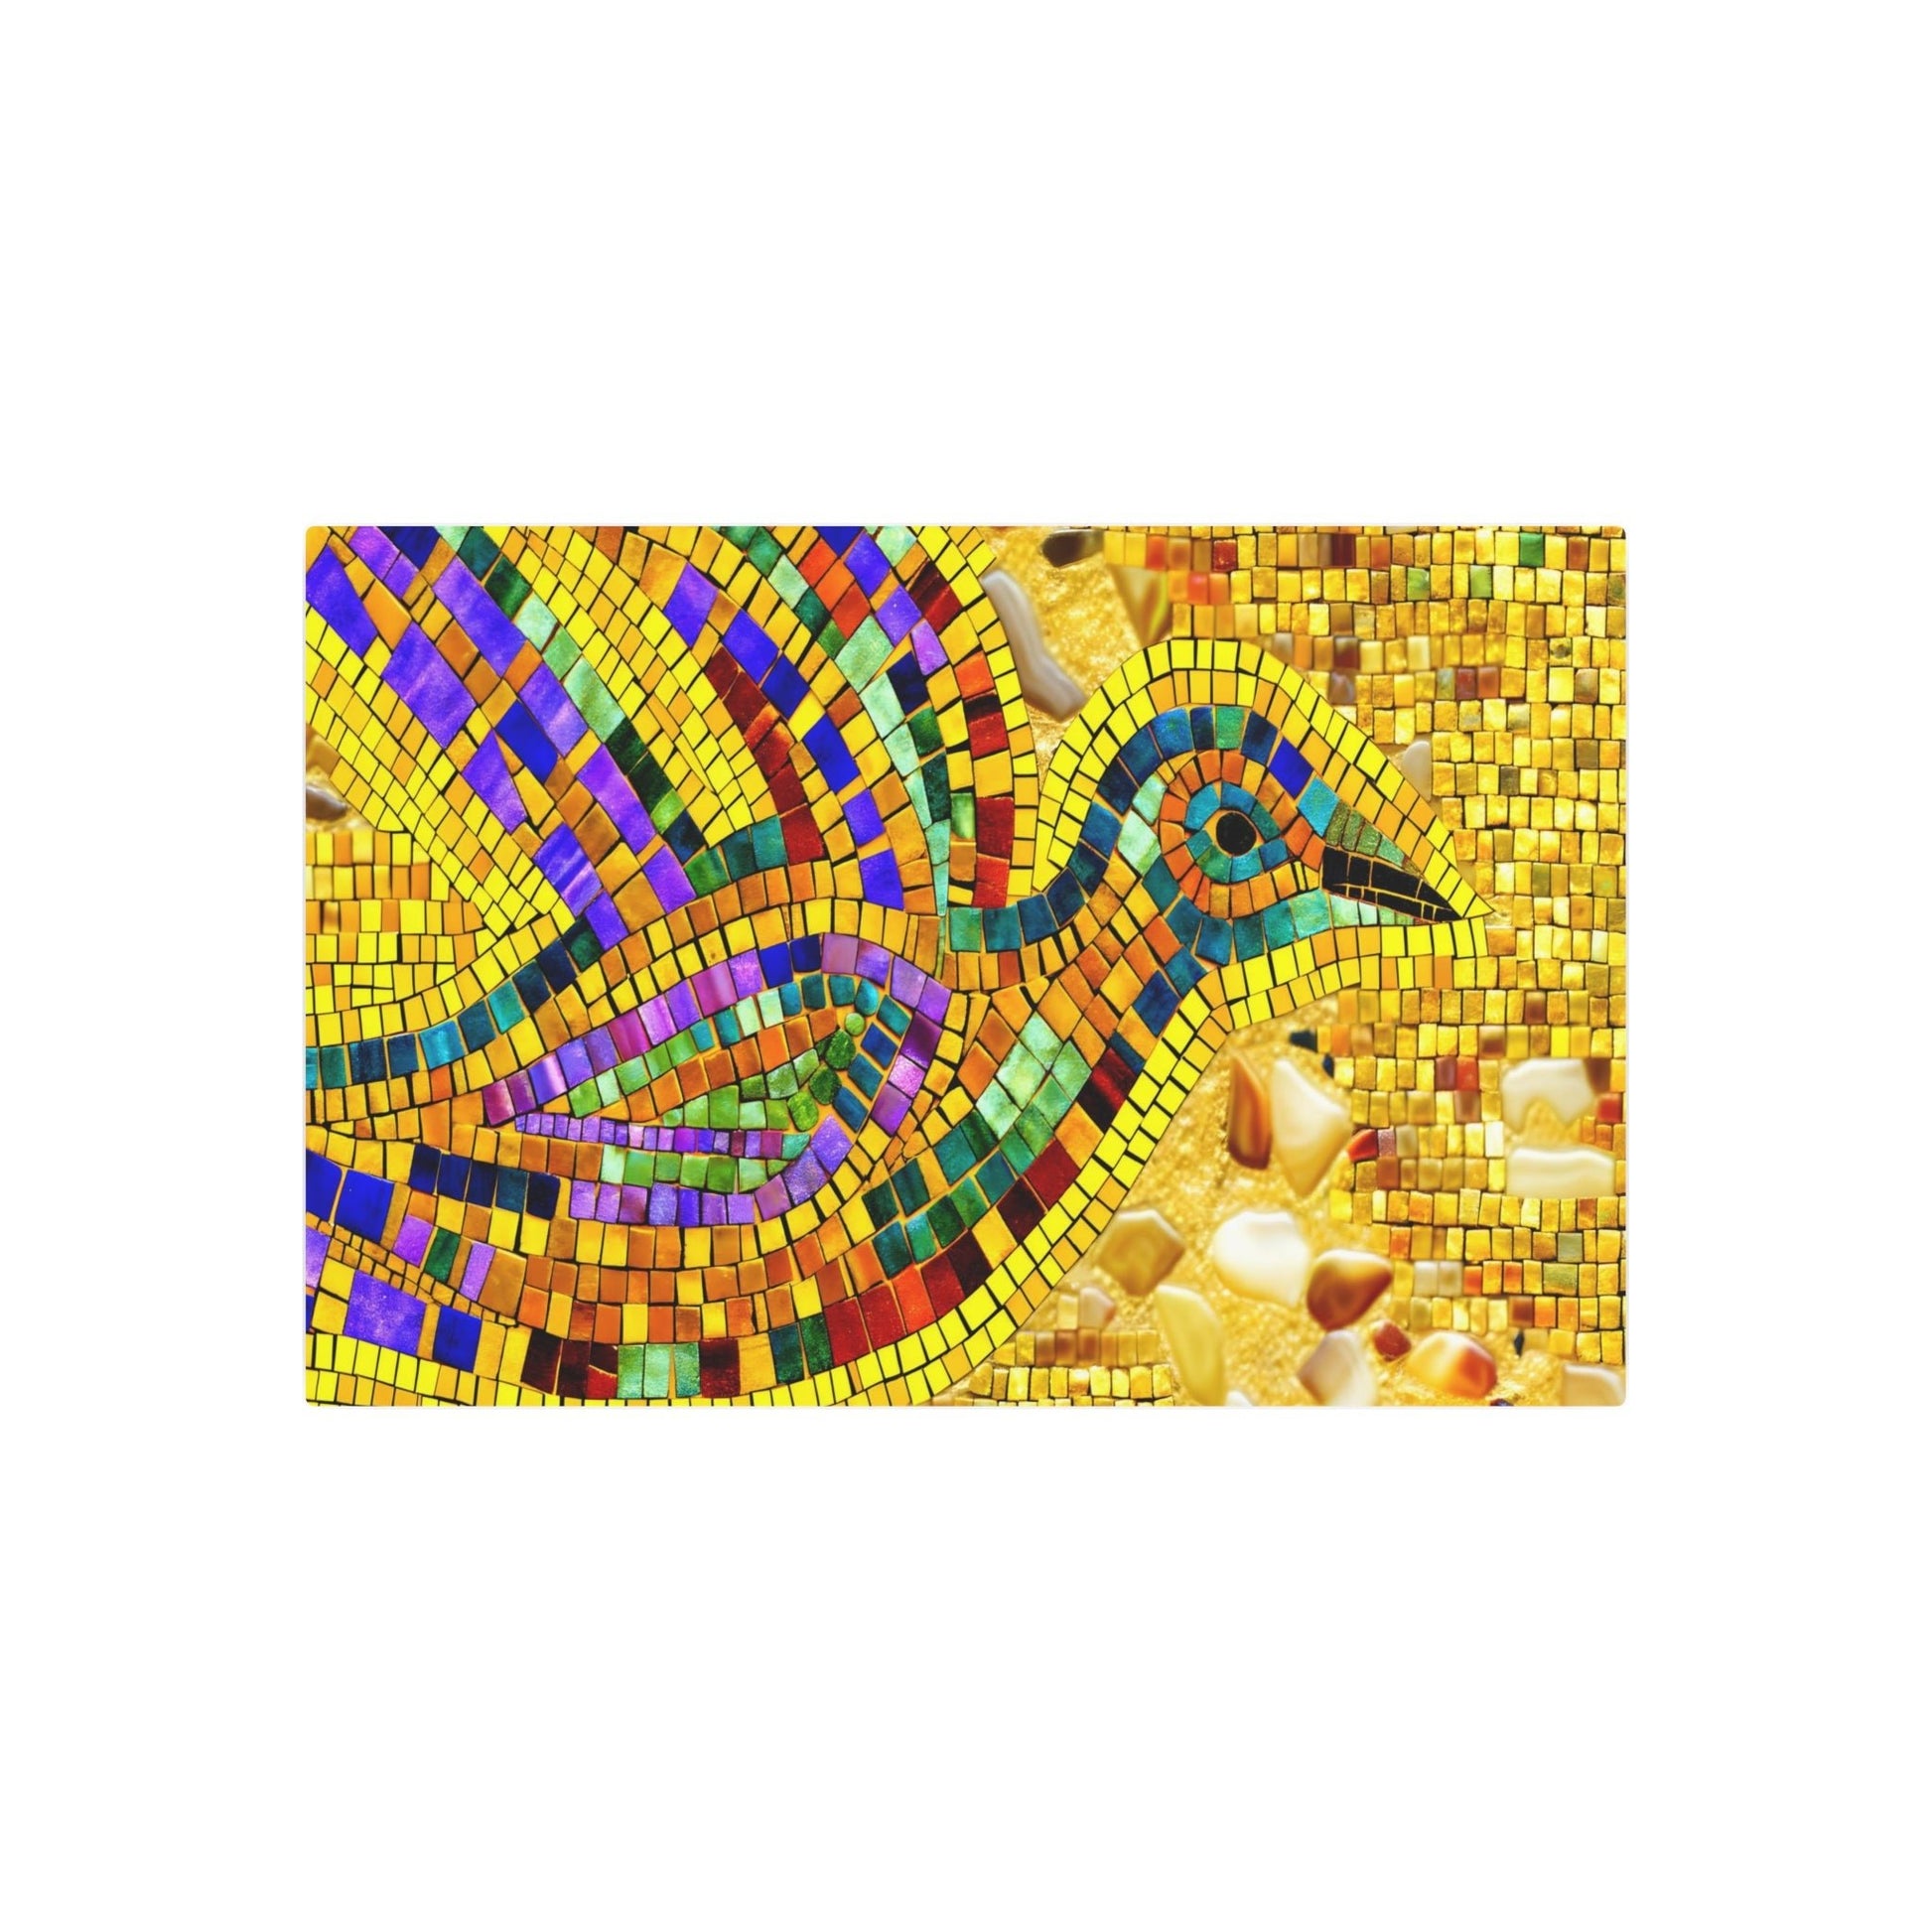 Metal Poster Art | "Byzantine Style Artwork: Vibrant Mosaic Bird Design with Shimmering Gold Tiles - Non-Western & Global Styles Collection" - Metal Poster Art 36″ x 24″ (Horizontal) 0.12''